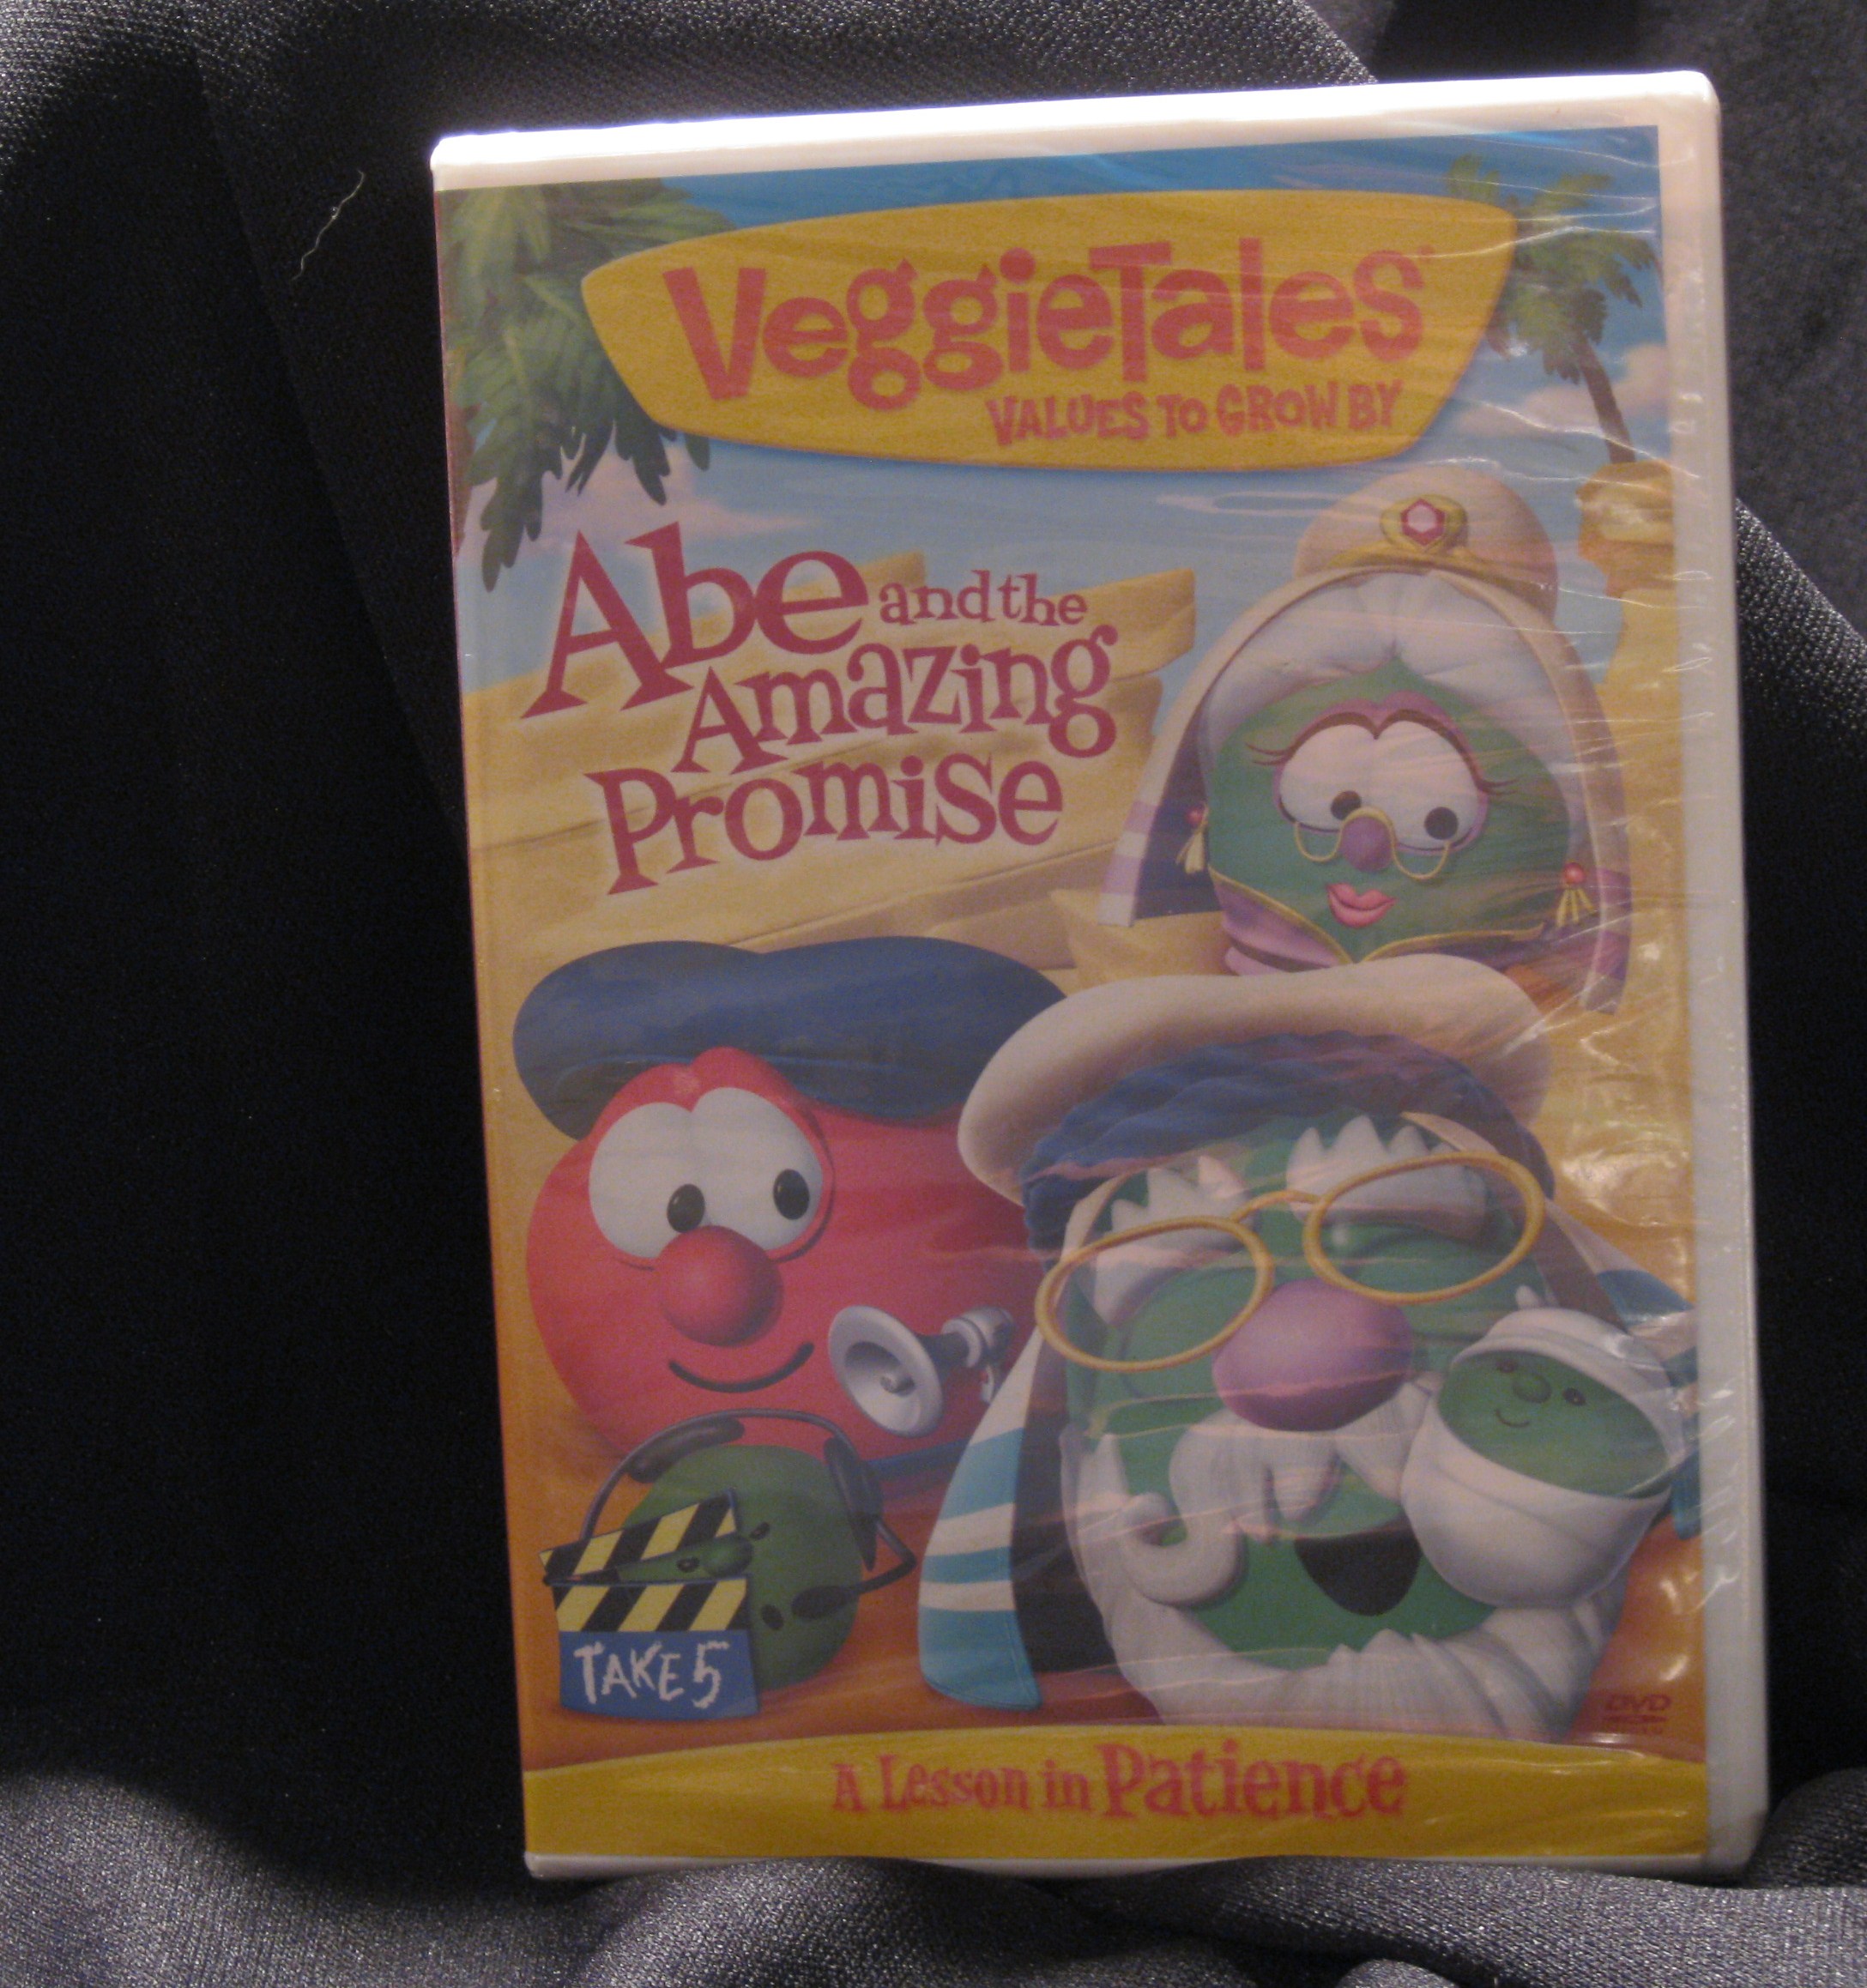 Abe and the Amazing Promise (Veggie Tales) DVD